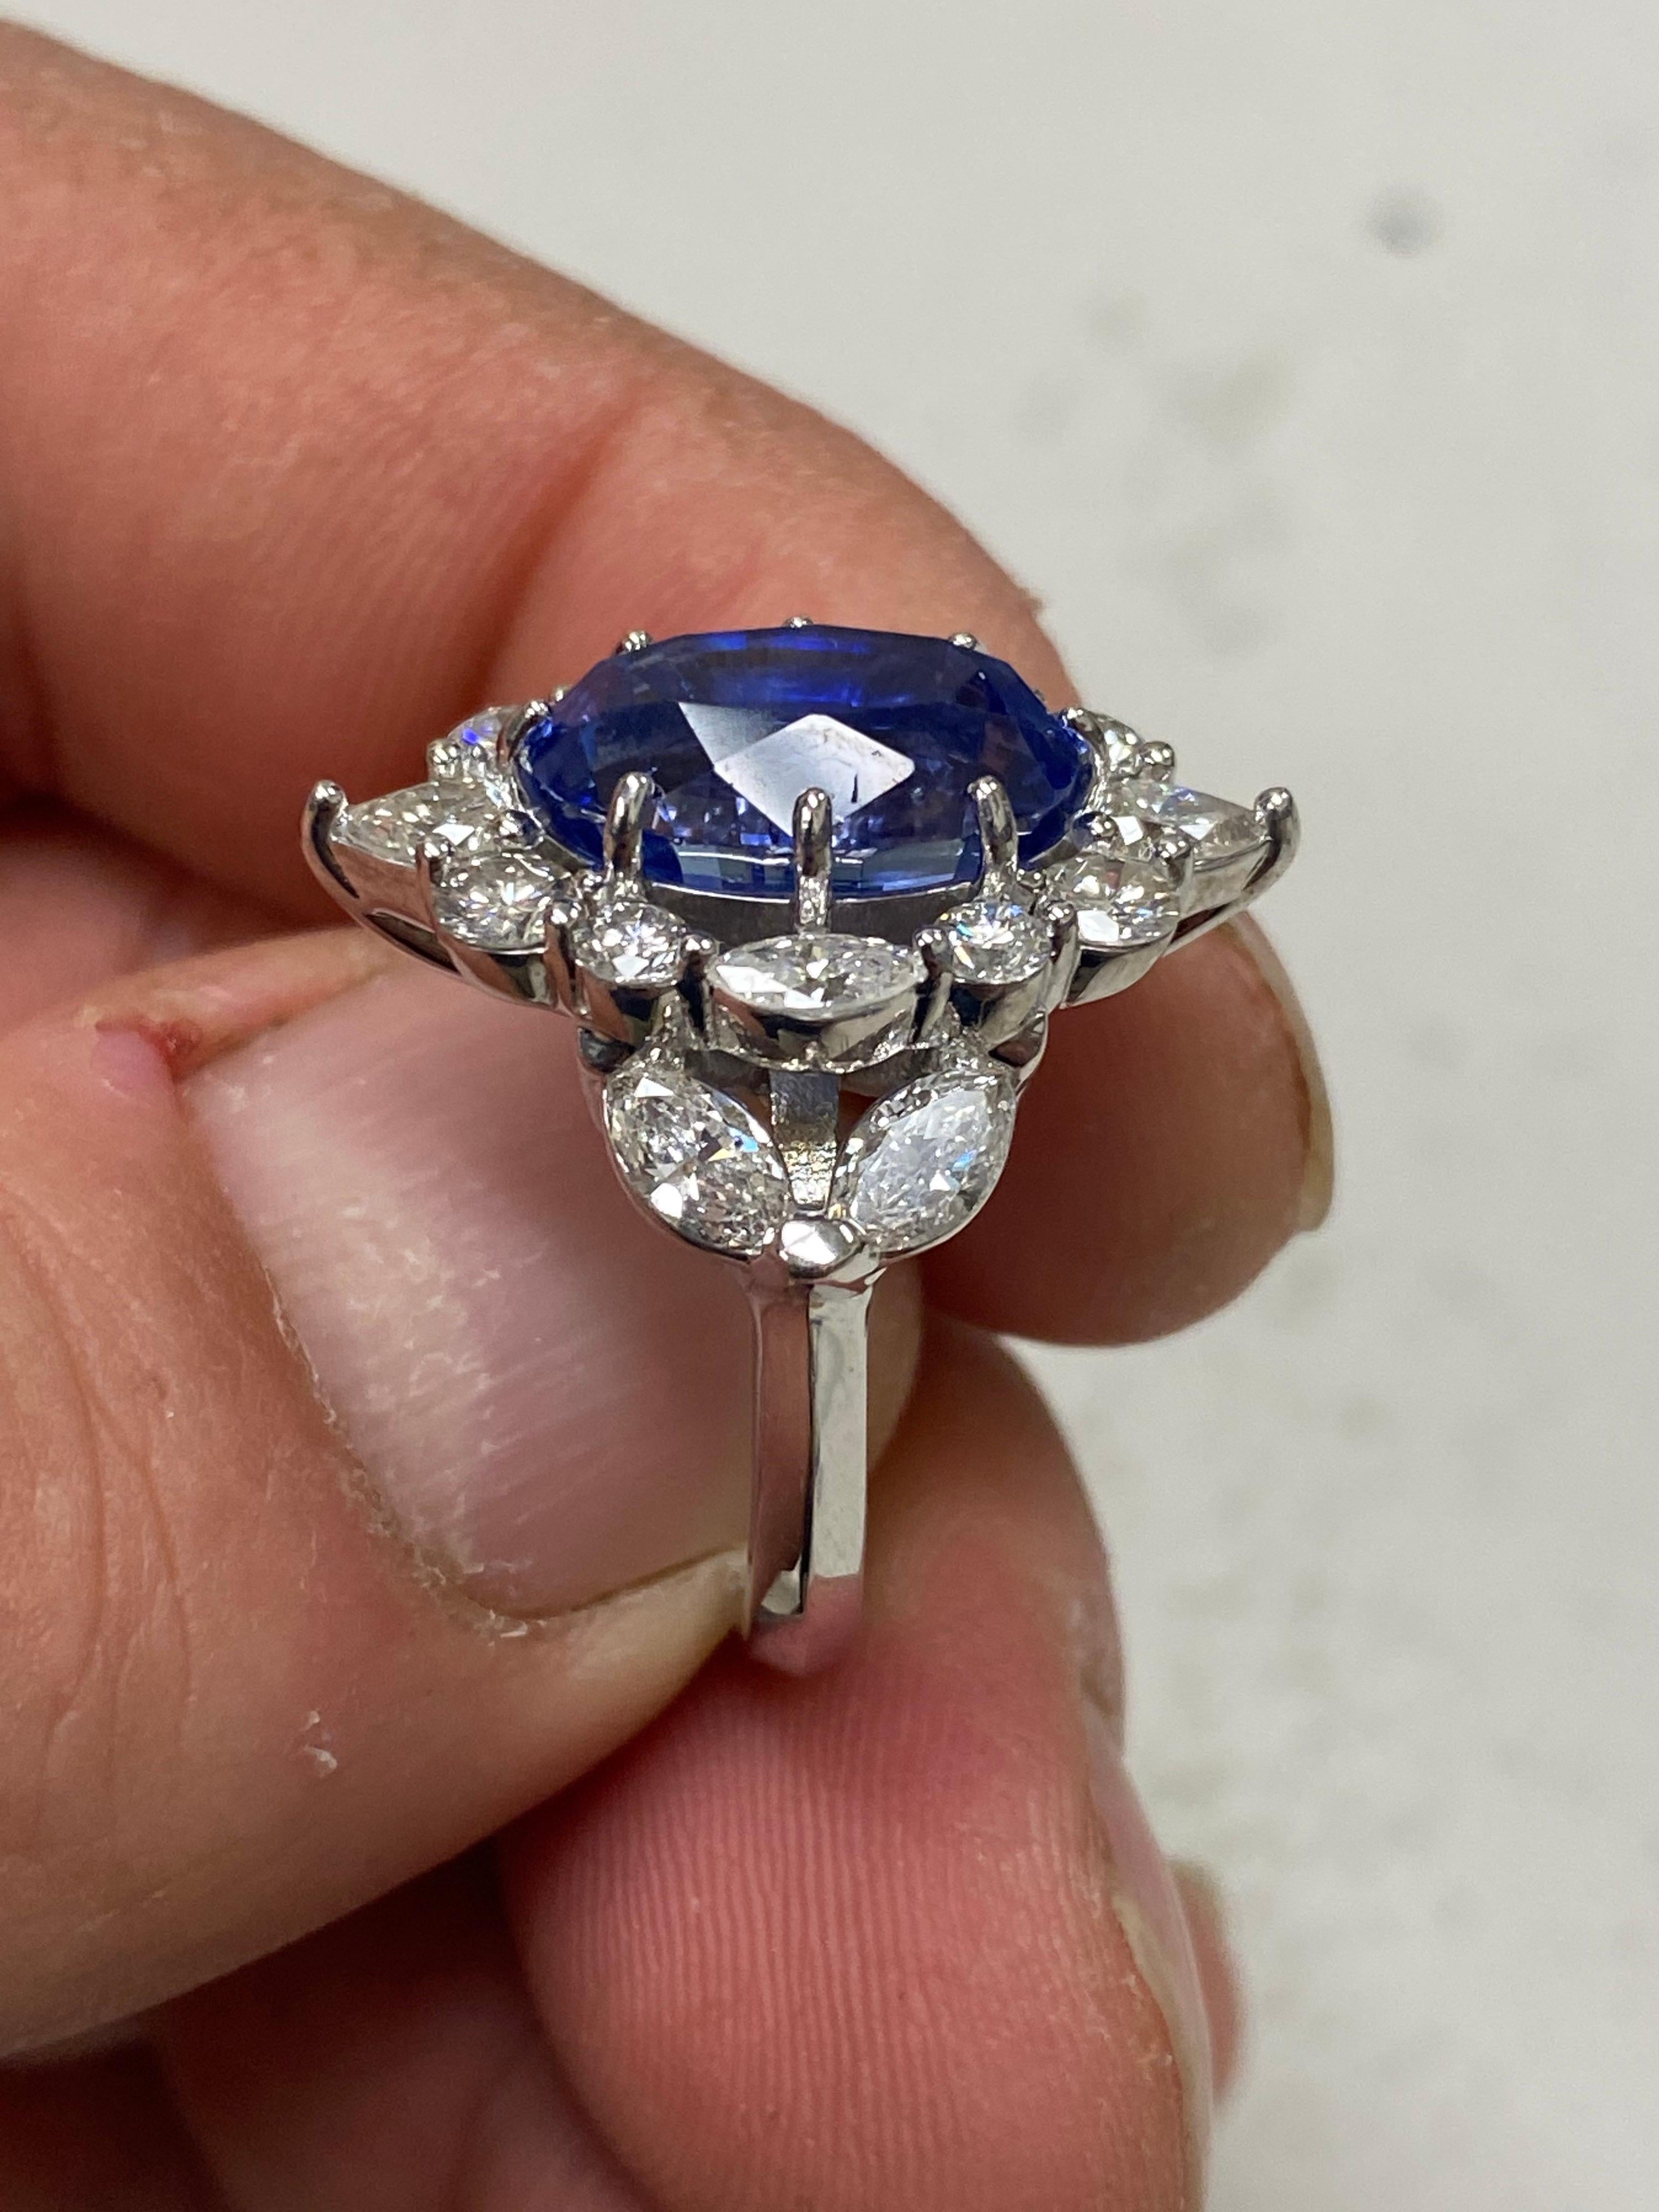 DeKara Design Collection 

Metal- 14K White Gold, .583.

Stones- 7.61 Carat No Heat Blue Sapphire (Although there is no origin on the certificate it is from Sri Lanka) 8 Round Diamonds, 2 Pear Shape Diamonds, 6 Marquis Diamoinds, G-H Color VS2-SI2